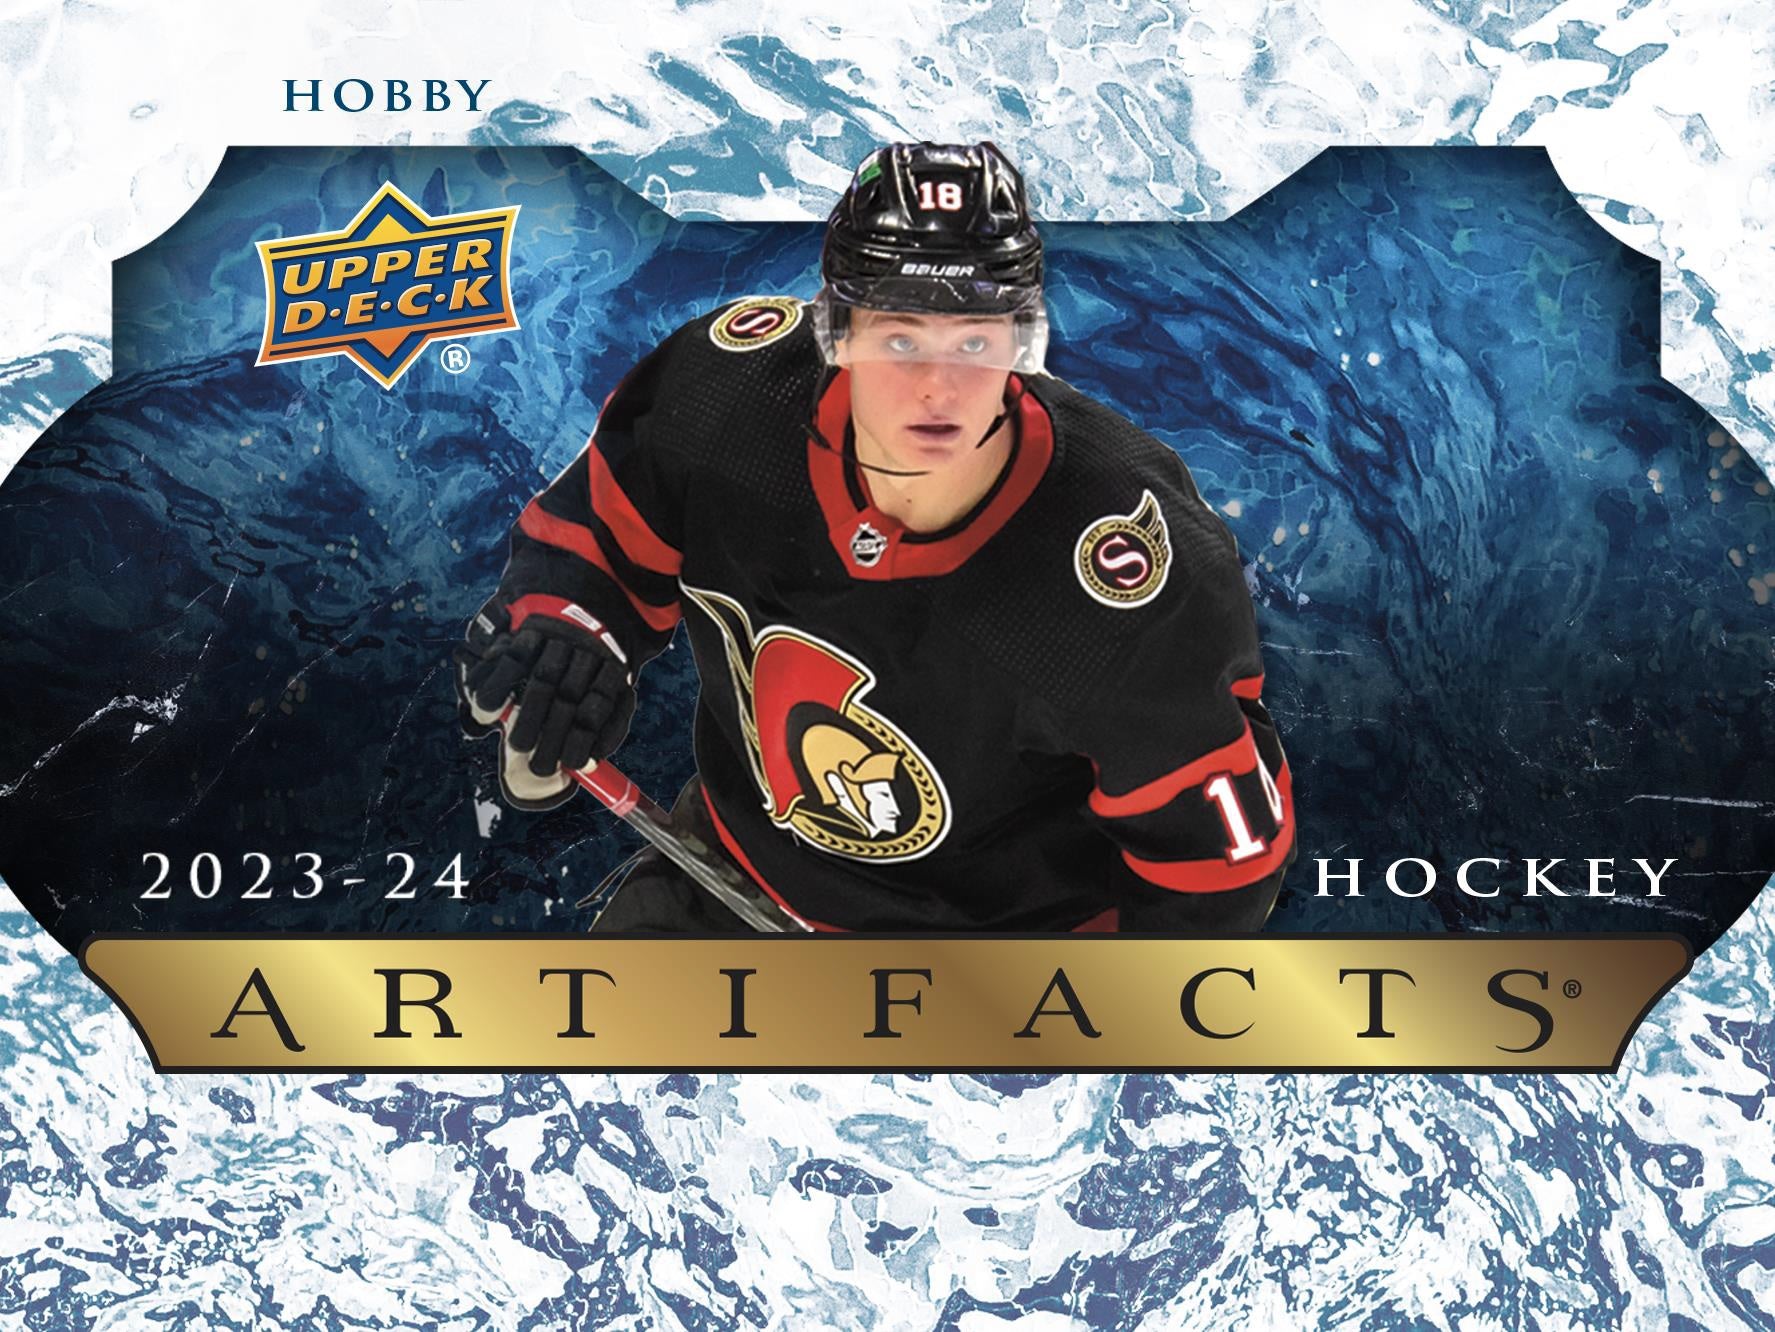 2023-24 Upper Deck Artifacts Hockey Hobby Box Master Case (Case of 20 Boxes) (Pre-Order) - Miraj Trading